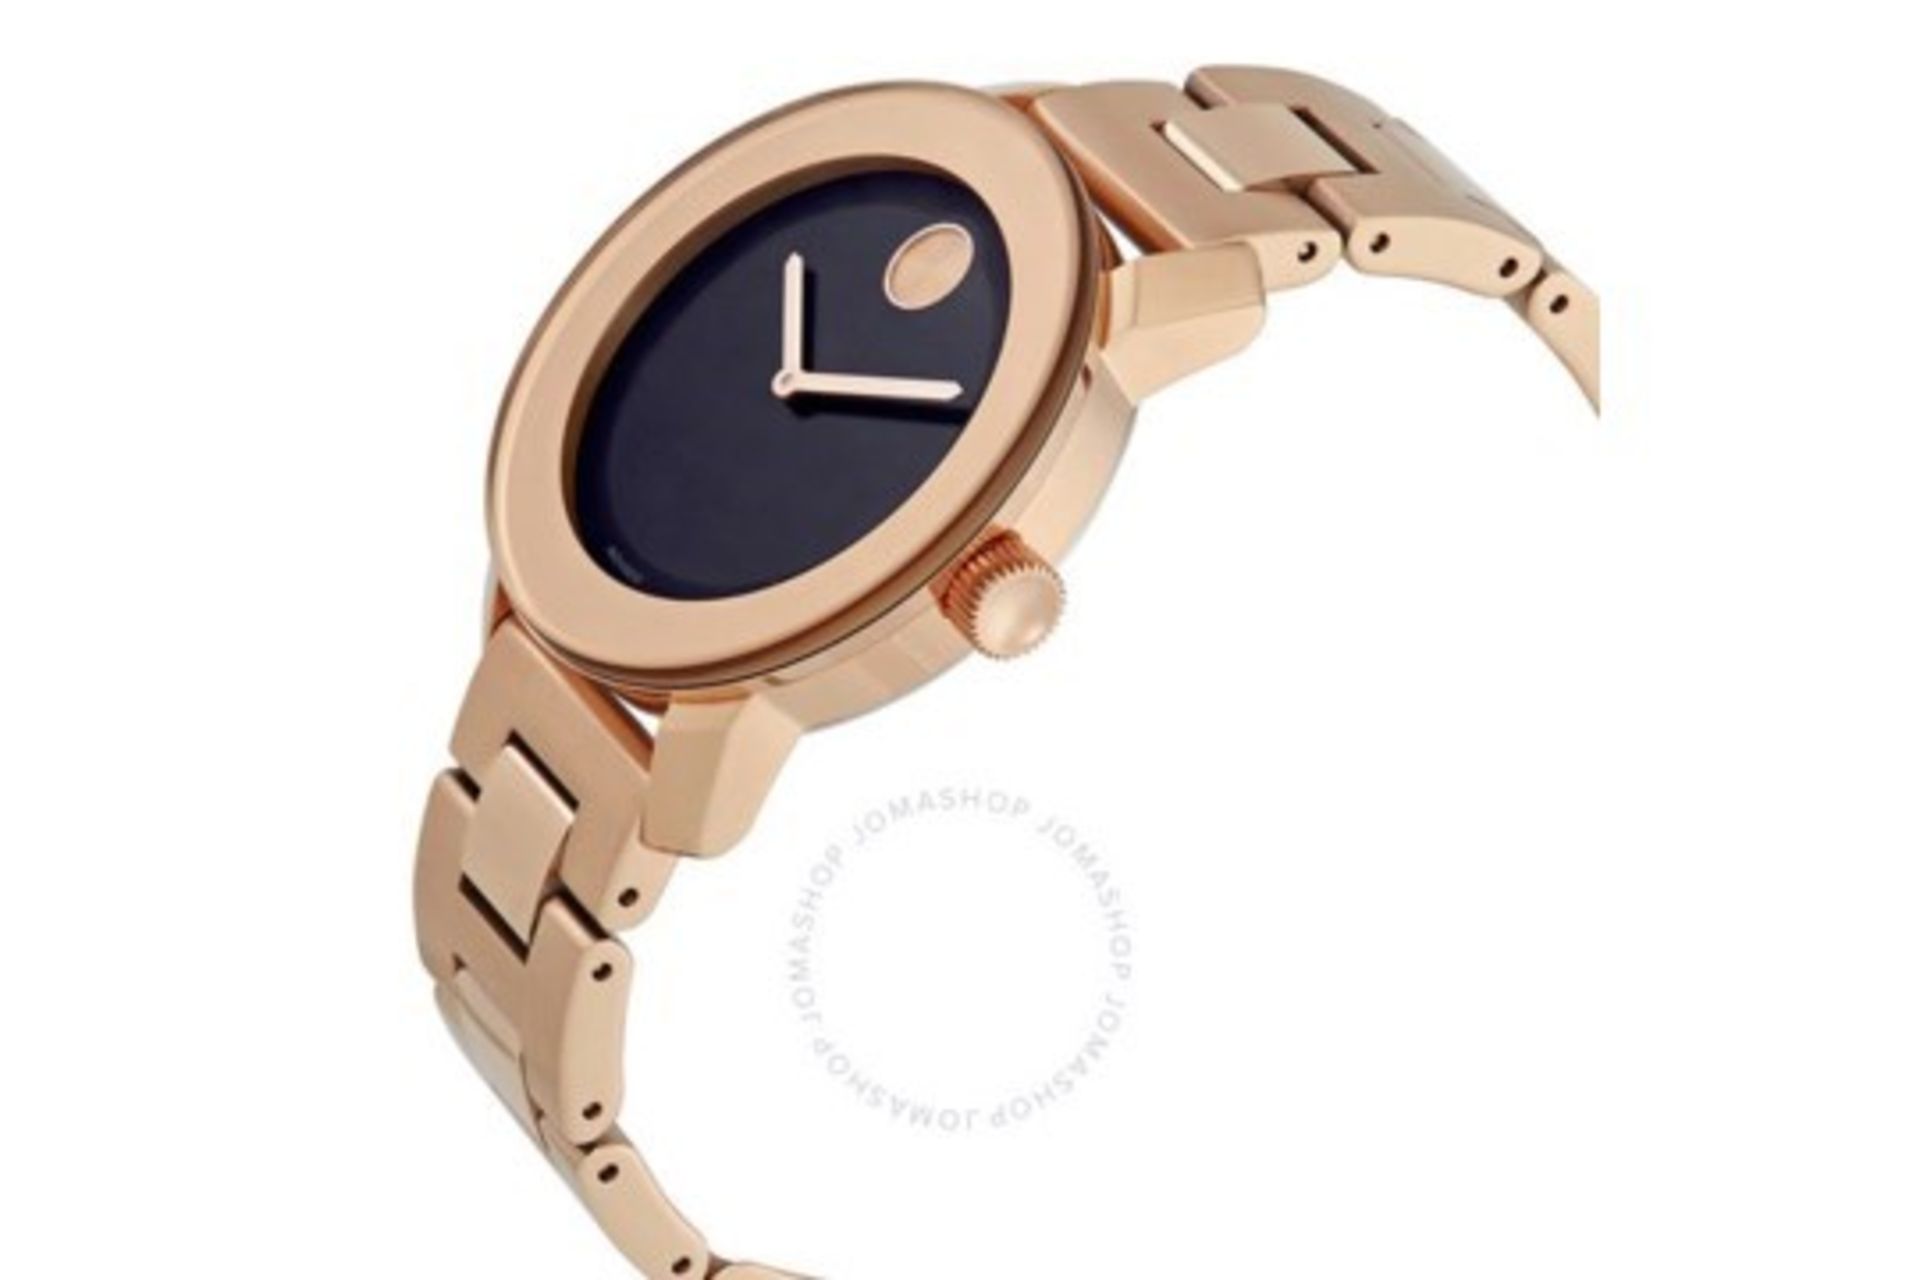 Movado Bold Ladies Watch Reference 3600463, PVD Rose Gold Plated Bracelet & Case, Black Dial. New - Image 2 of 3